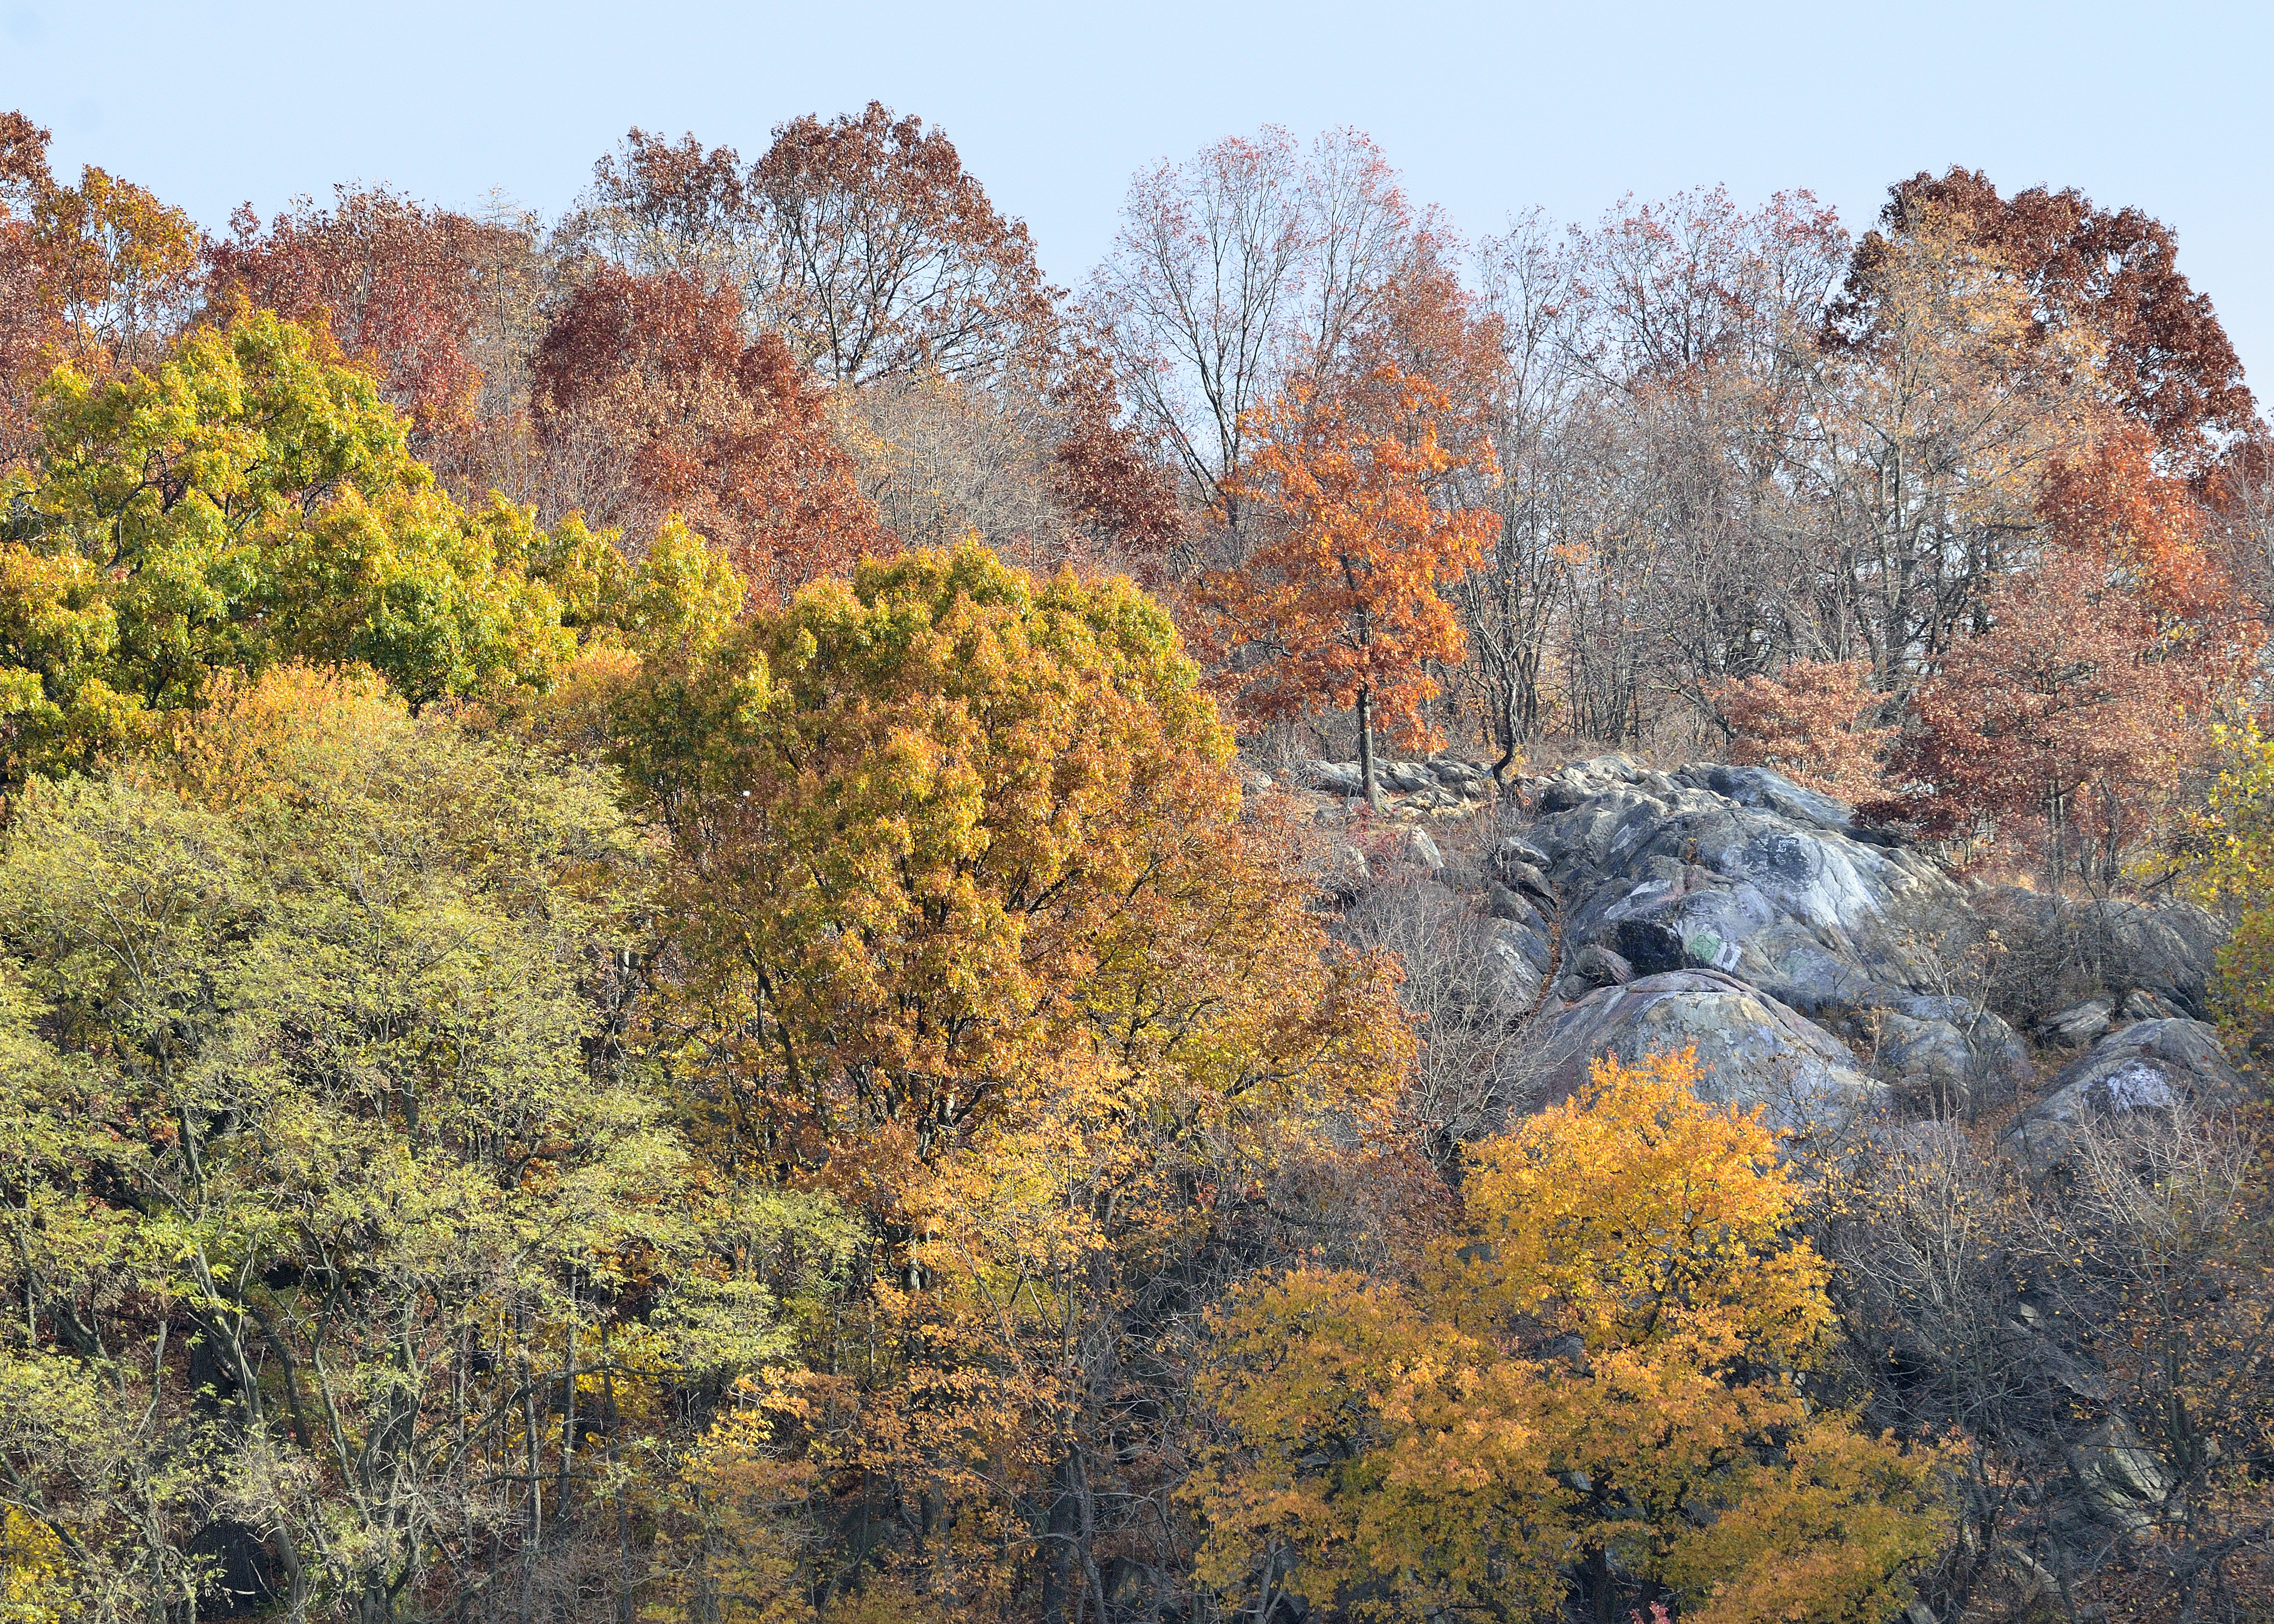 The rocky woodlands of Van Cortlandt Park. <a href="https://www.flickr.com/photos/stevenpisano/10844163986/" target="_blank">Photo</a>: Steven Pisano/<a href="https://creativecommons.org/licenses/by-nc/2.0/" target="_blank" >CC BY-NC 2.0</a>